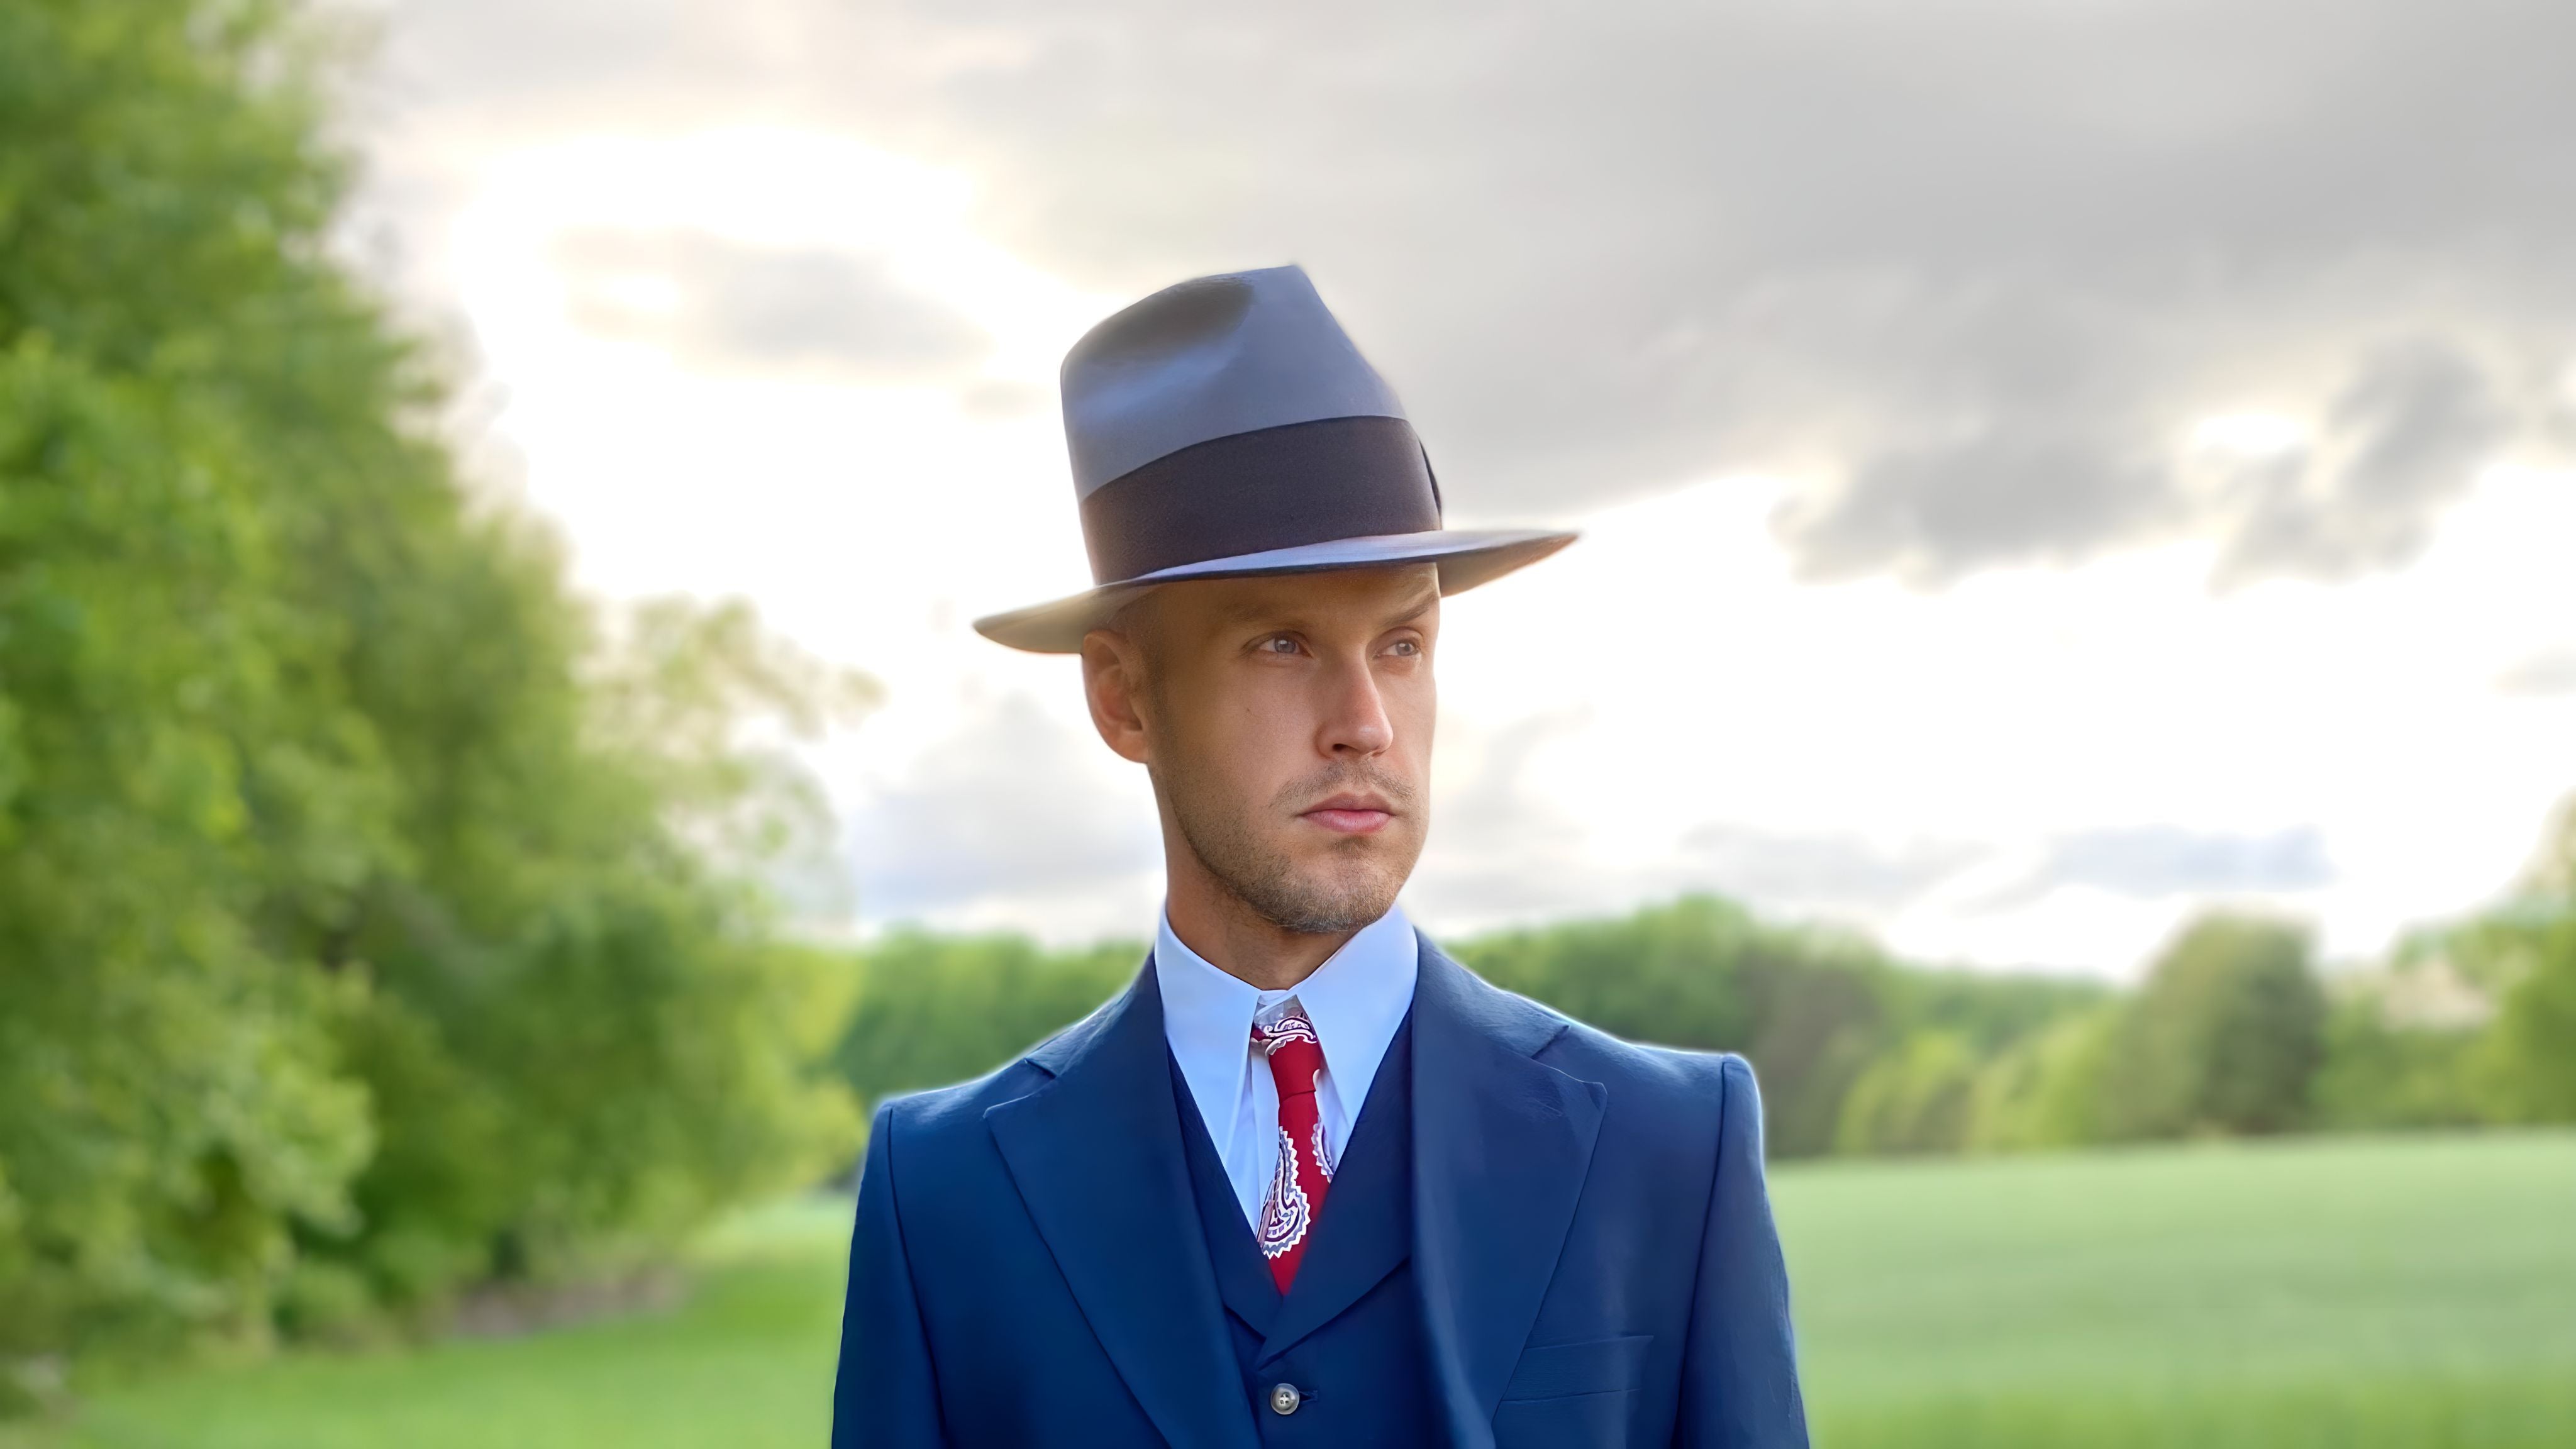 A discerning man in a custom beaver felt fedora hat, exuding sophistication and a unique personal style against a vibrant natural backdrop.